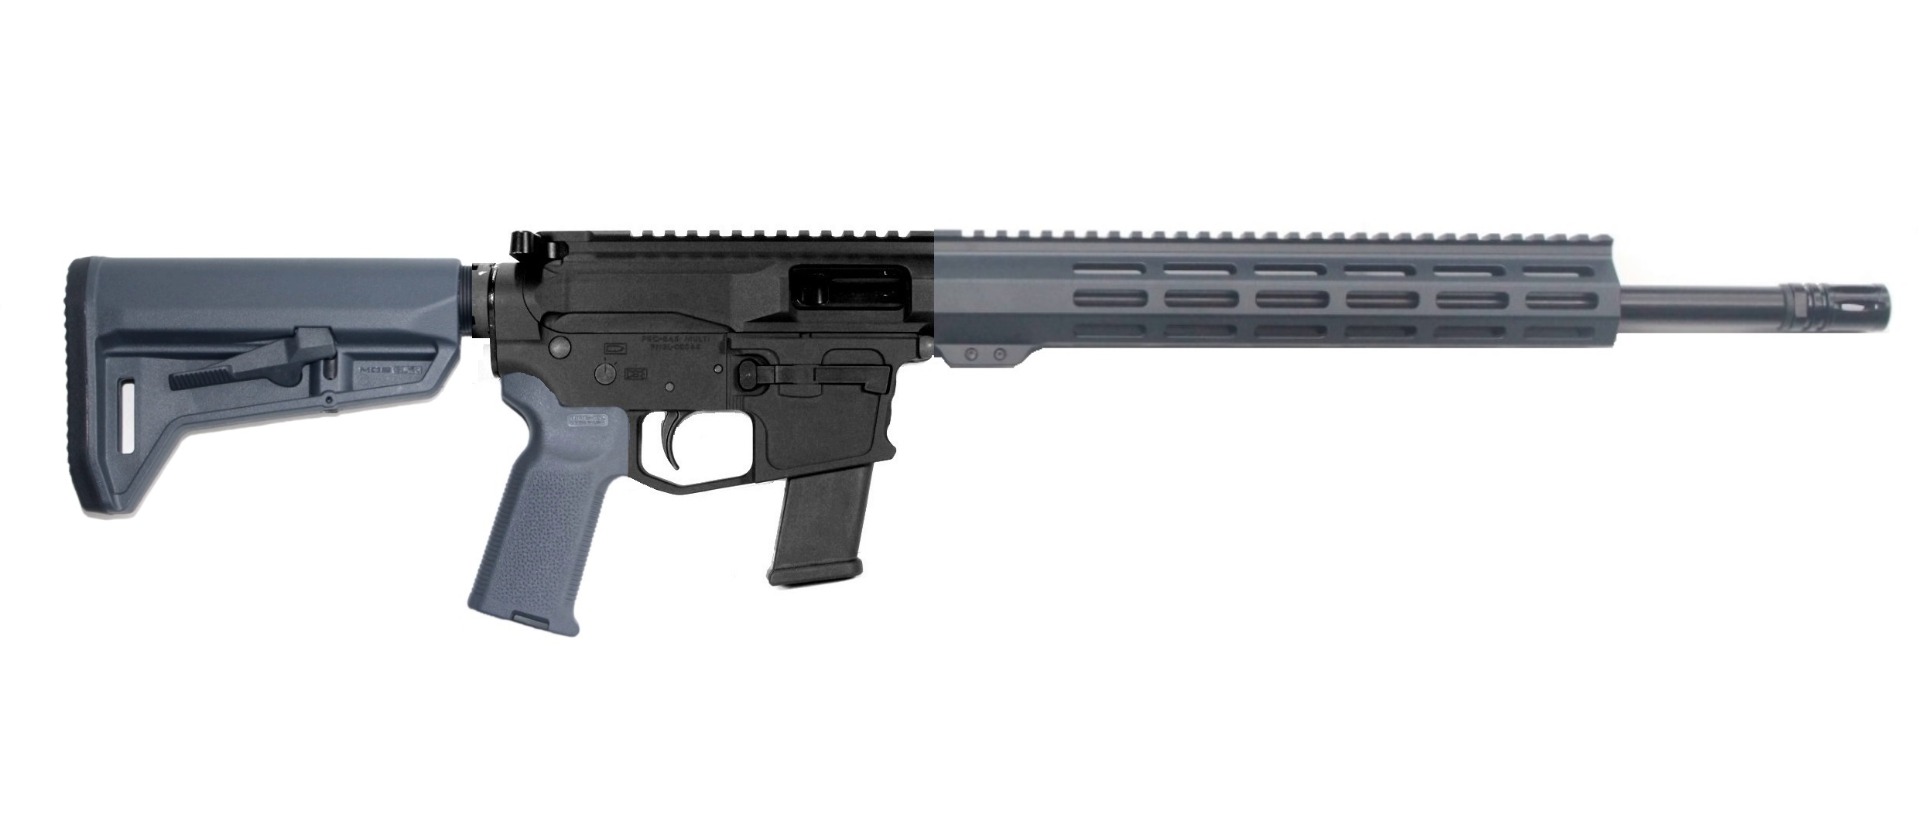 16 inch 45 ACP AR-15 Rifle | In Stock | Live Inventory 